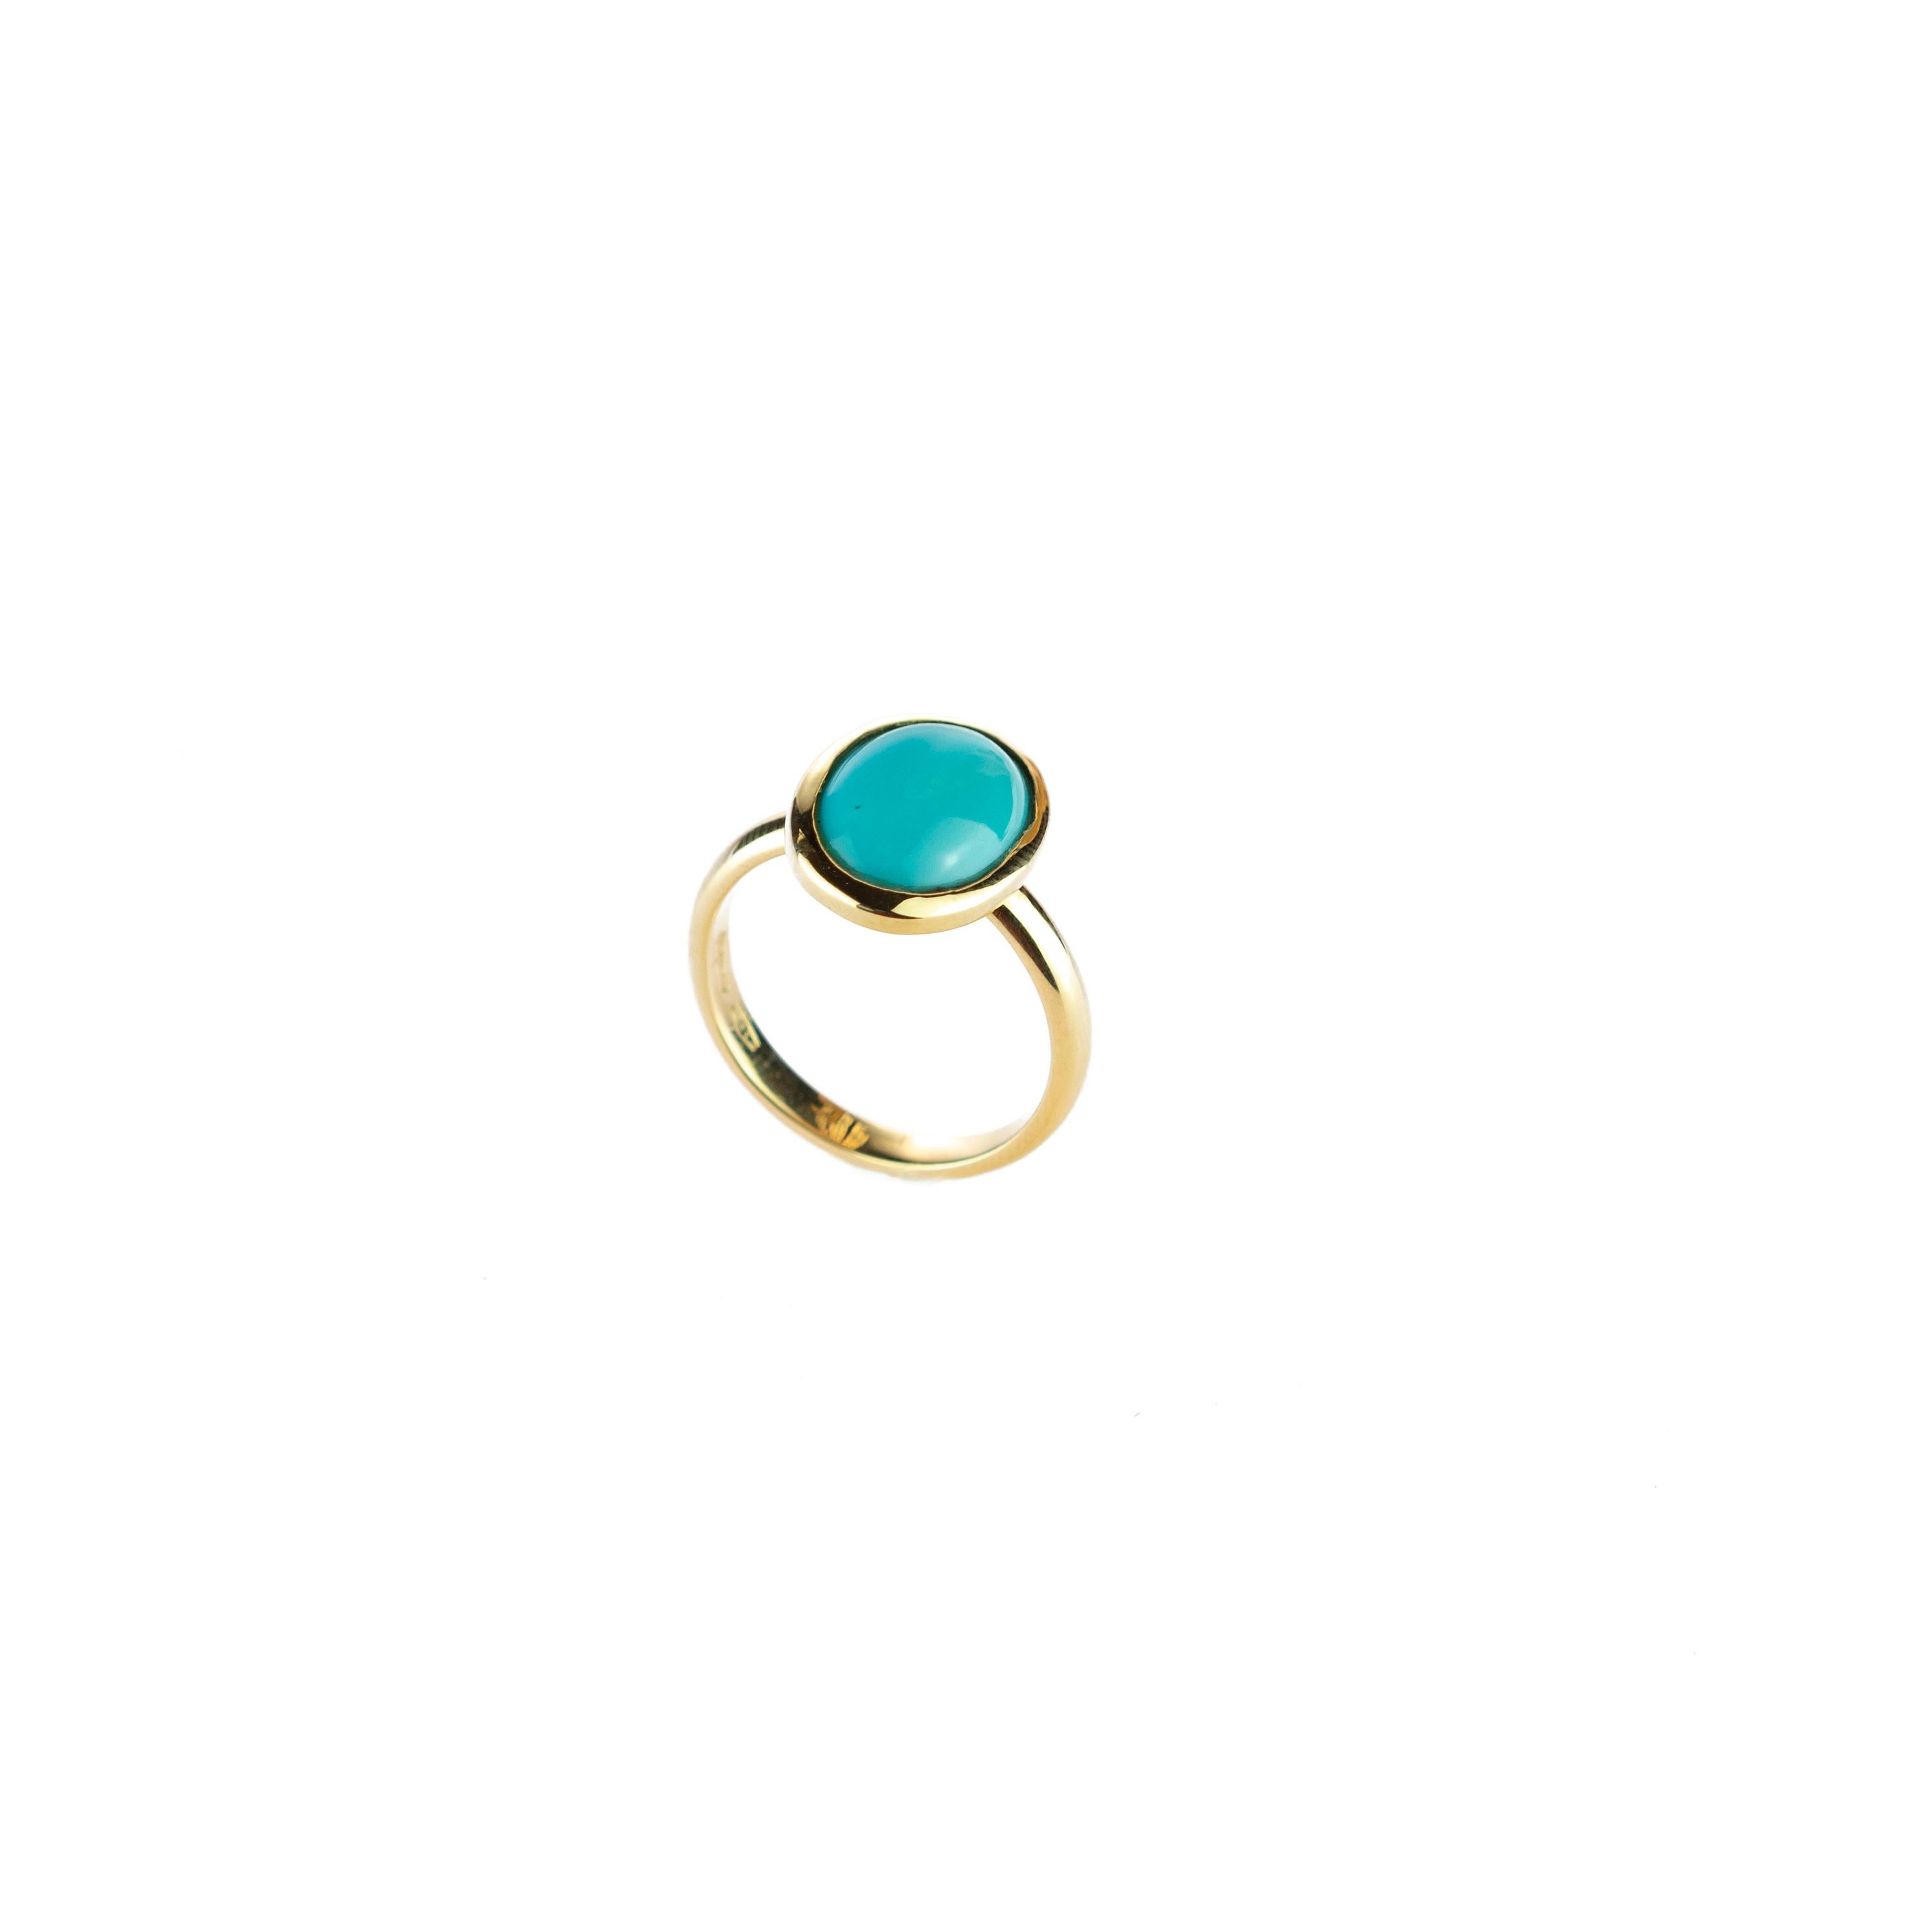 Magnificent ring with an exceptional art work, outstanding display of color and Italian craftsmanship designed by Intini Jewels. This unique ring has a natural oval turquoise over a 18 karat yellow gold cocktail design.
 
This ring represents the